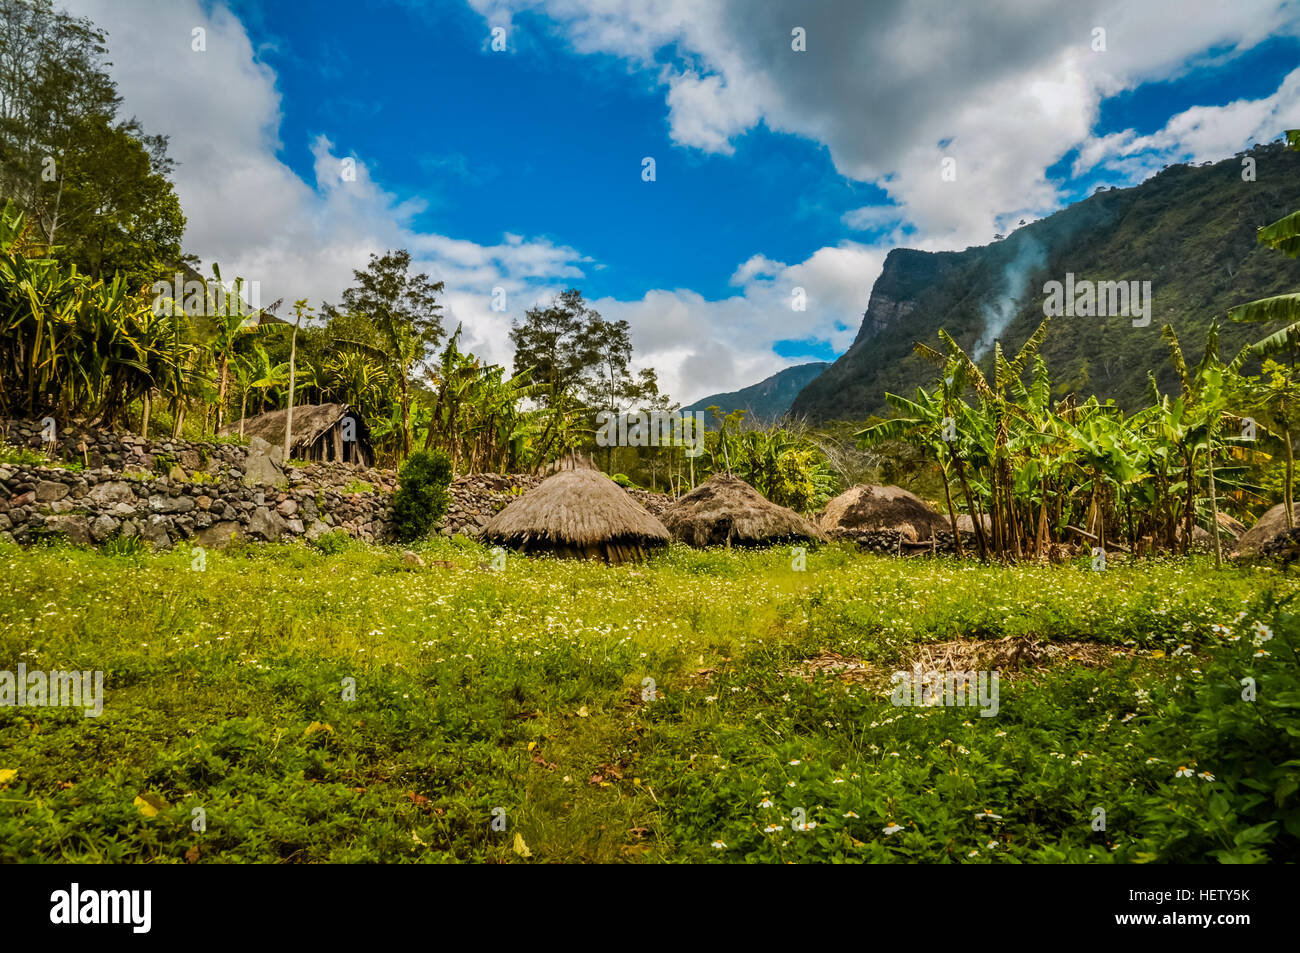 Small houses with straw roofs in village surrounded by greenery and high mountains in Dani circuit near Wamena, Papua, Indonesia. Stock Photo